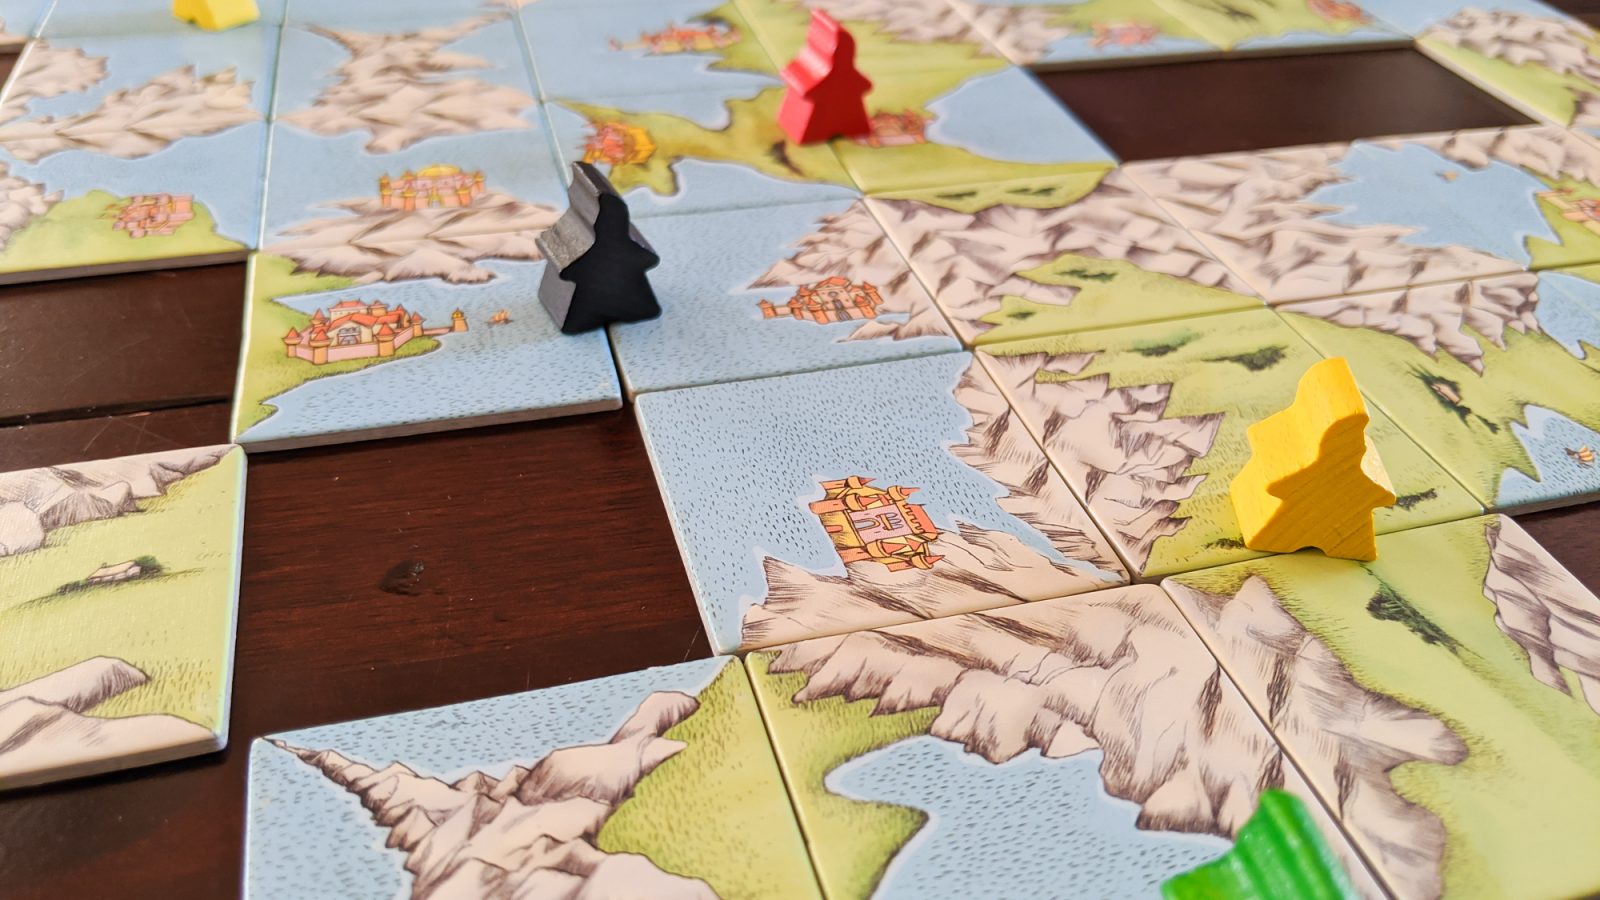 17 Travel-Themed Board Games for When You Can't Leave the House #boardgame #tickettoride #travelgames